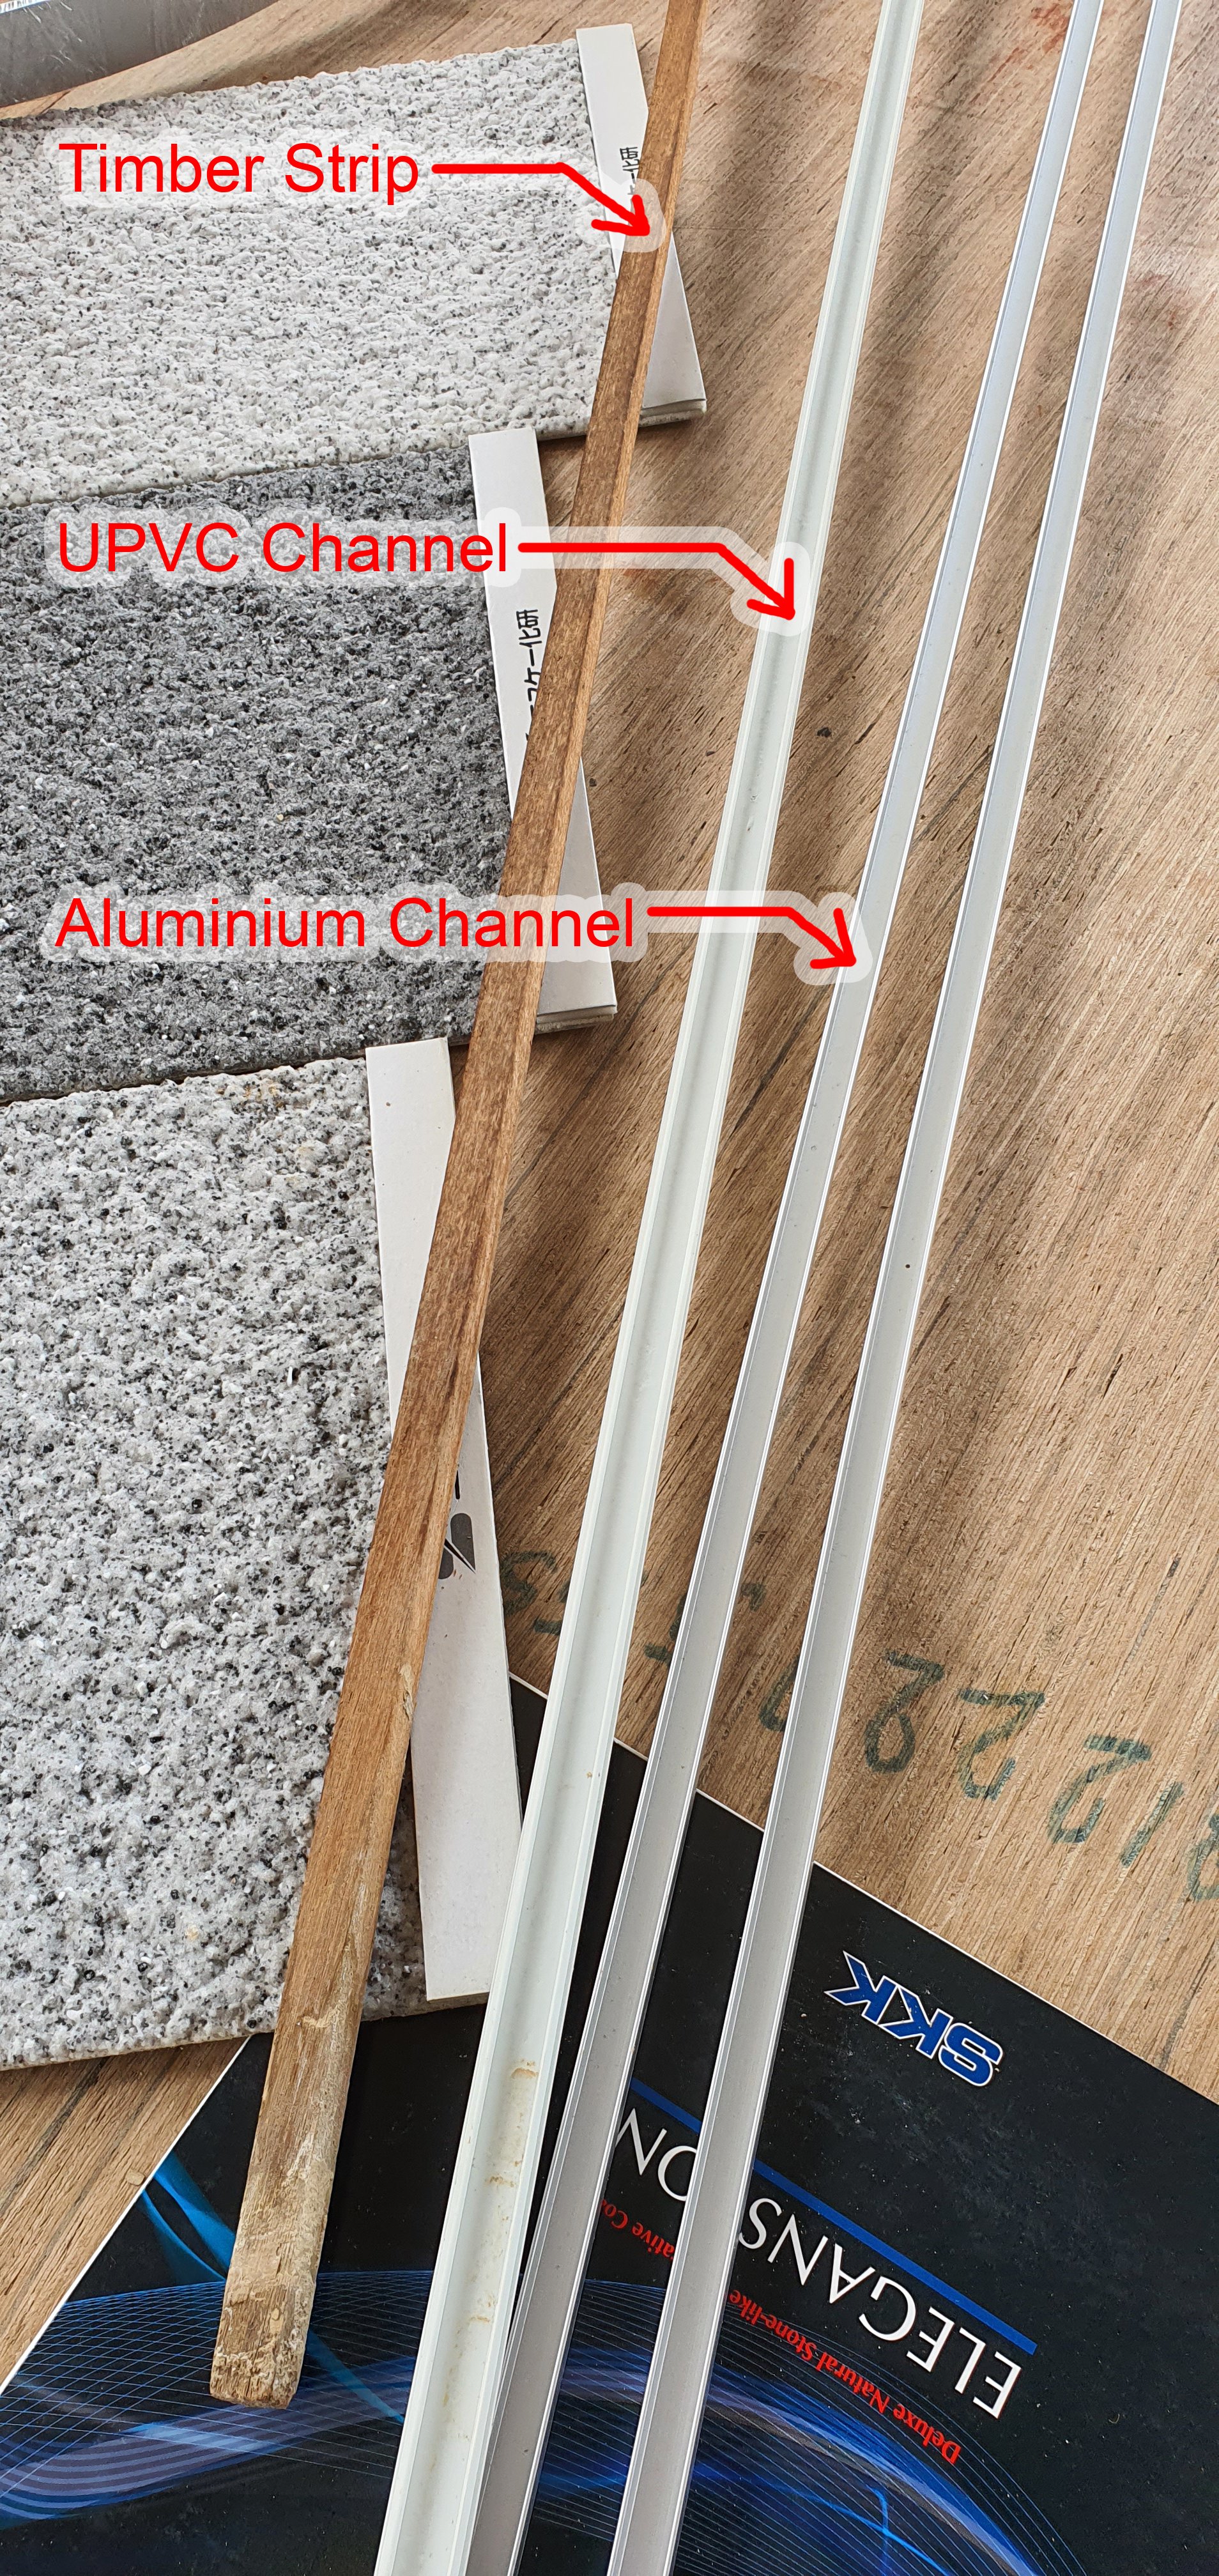 Selected timber strip, UPVC channel, and aluminium channel to making groove lines